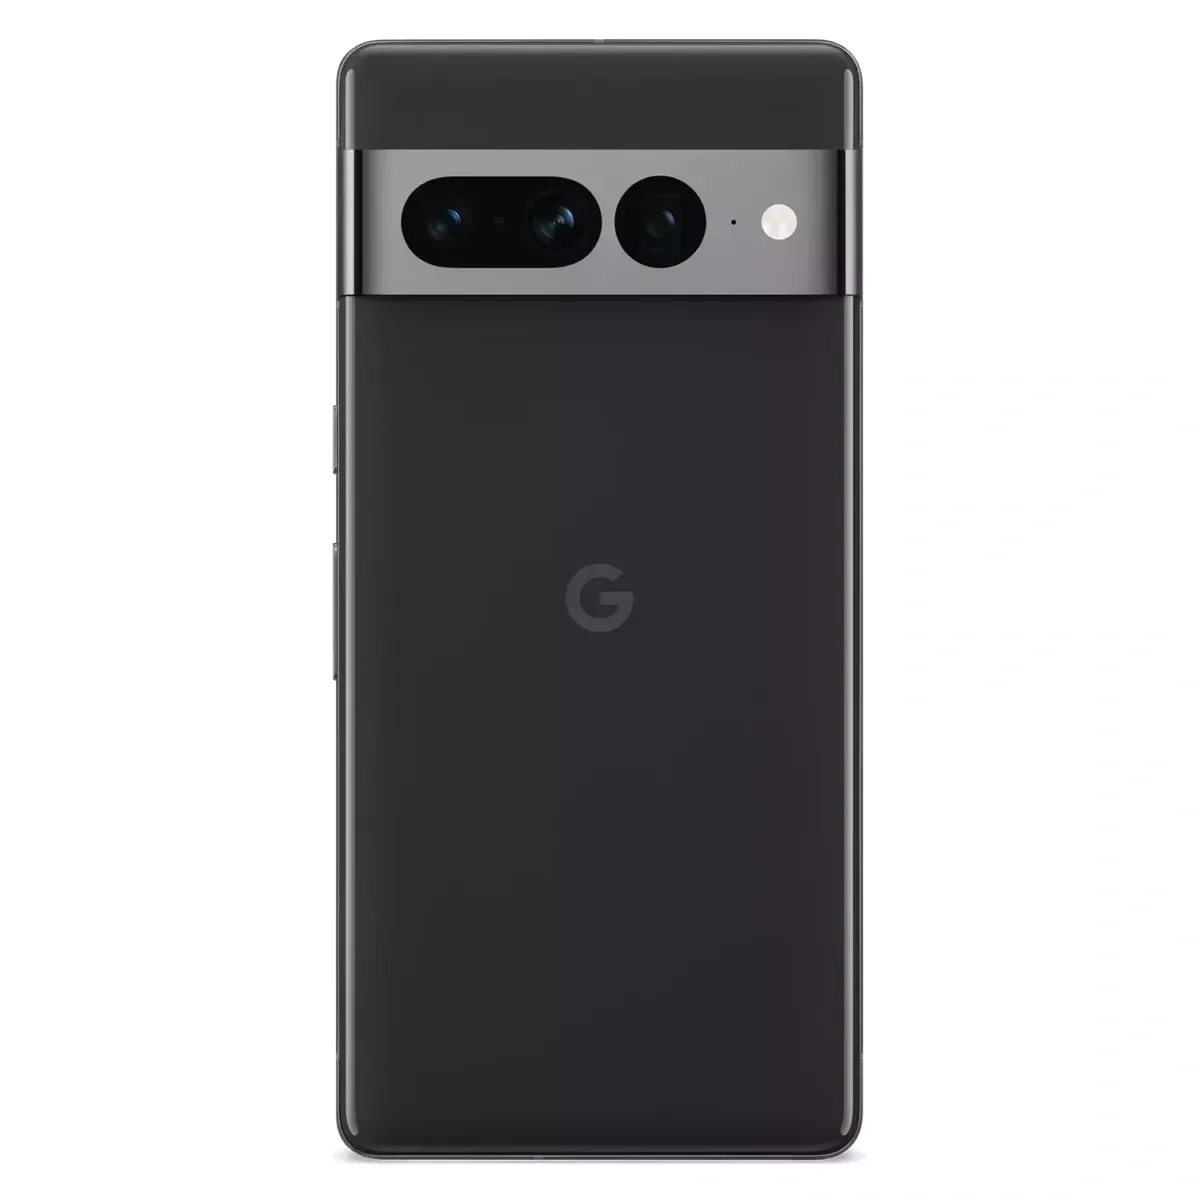 Best Buy is carrying the Pixel 7 Pro in all three colors. You can buy one and get a $200 Best Buy e-gift card for free.